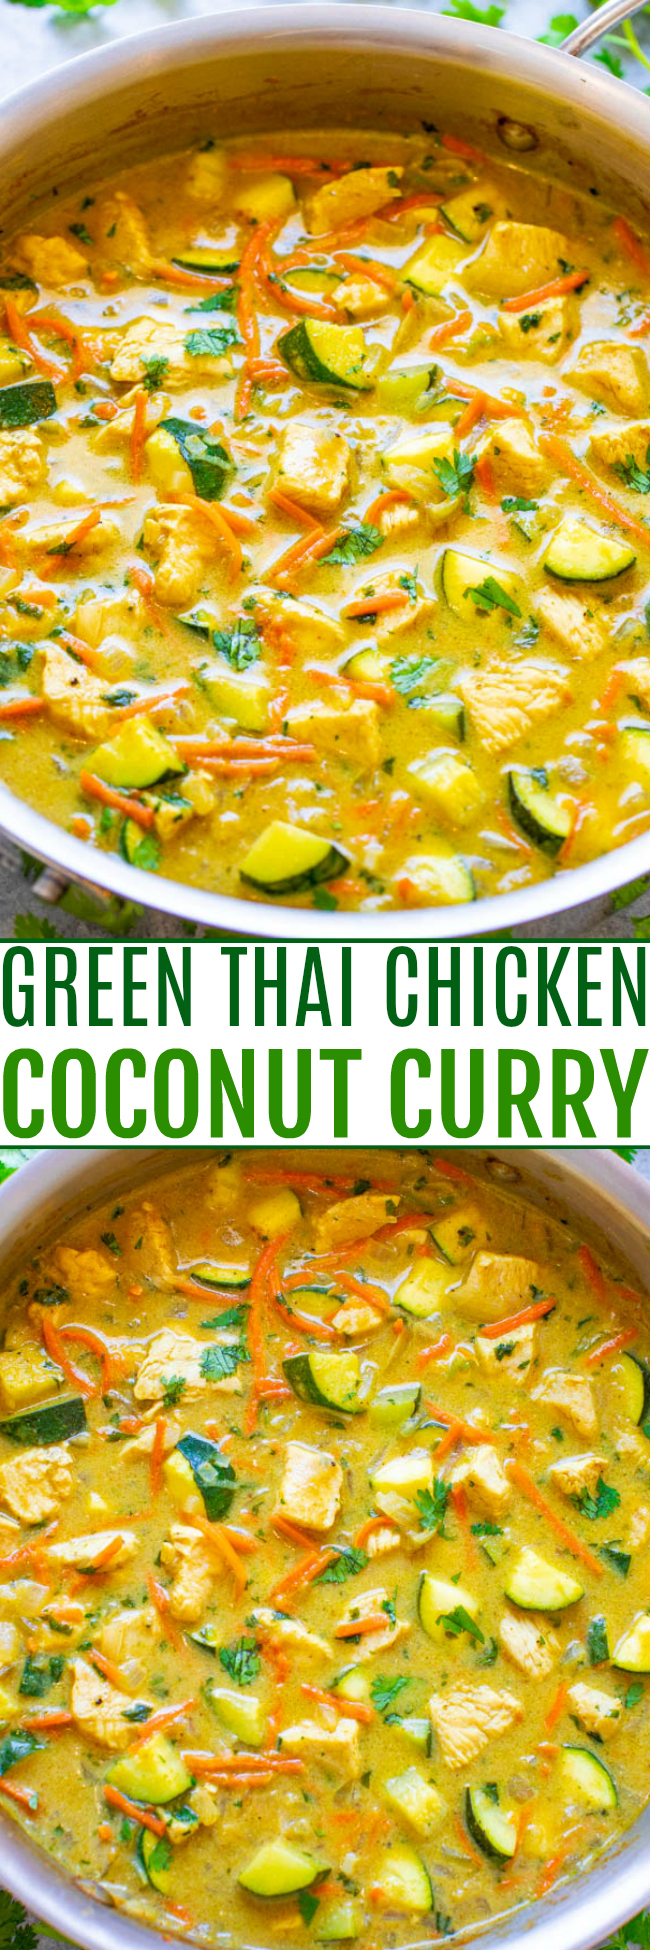 Slow-Cooker Thai Green Curry Recipe by Tasty